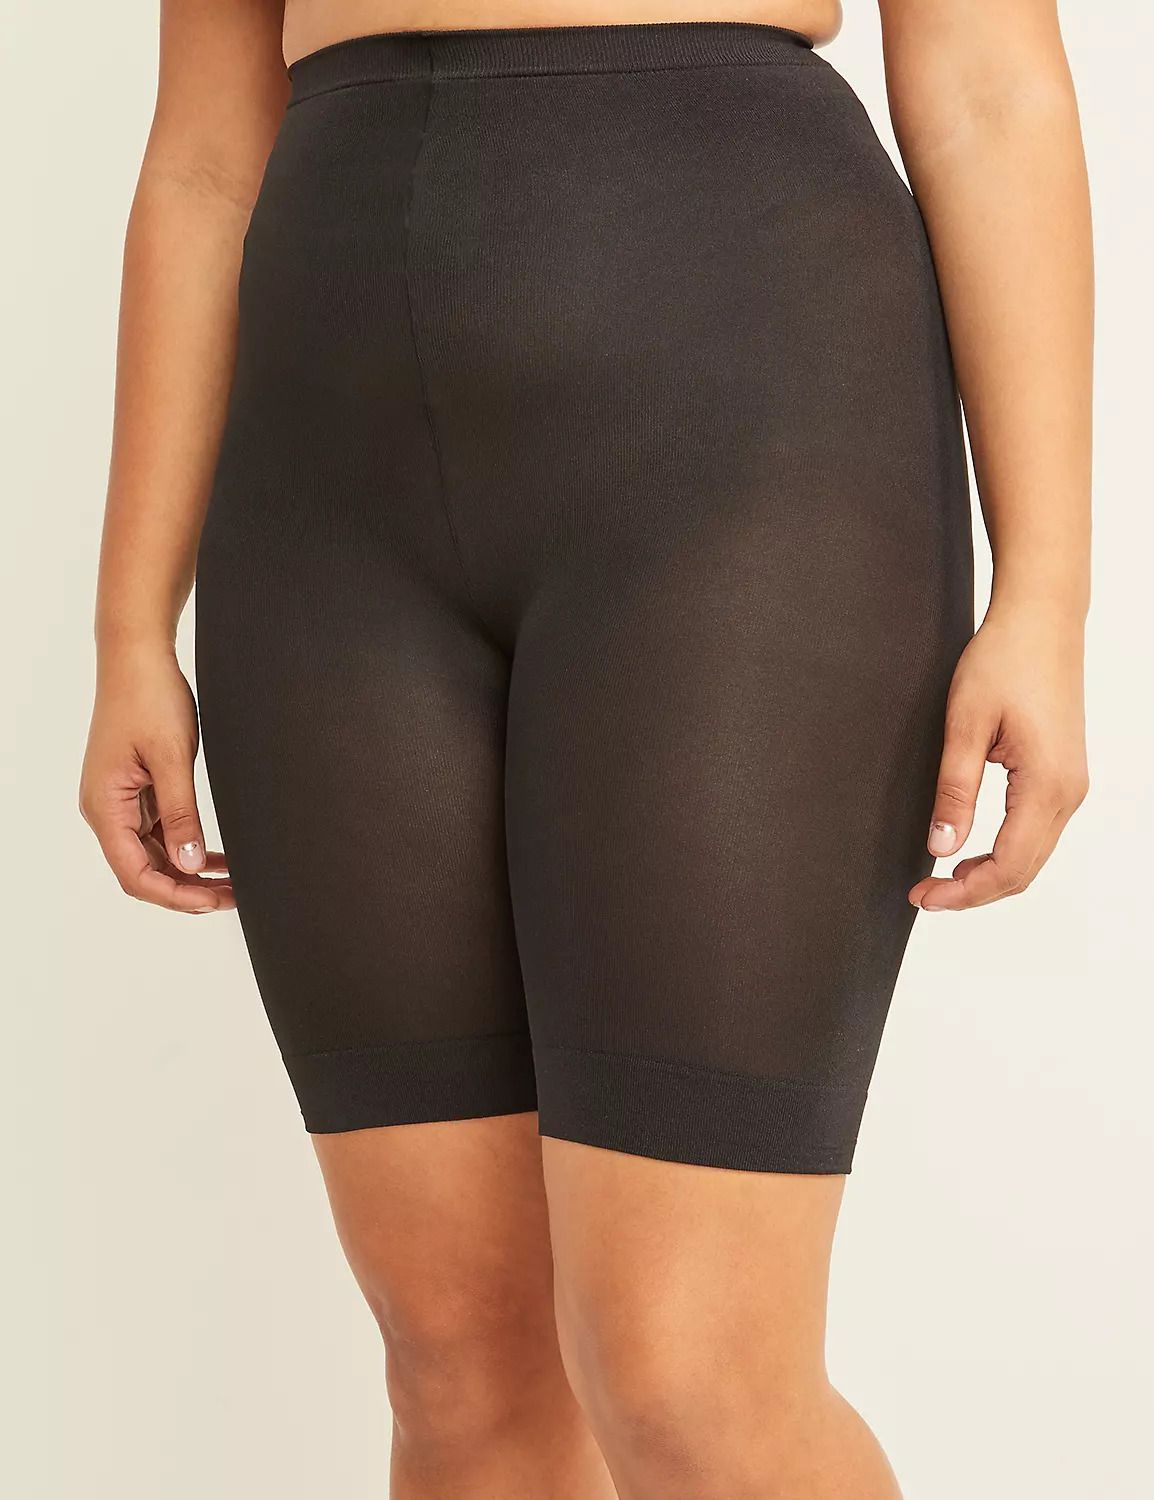 I have 'full thighs' & found the best anti-chafing shorts - they gave my  sweaty legs some much-needed relief